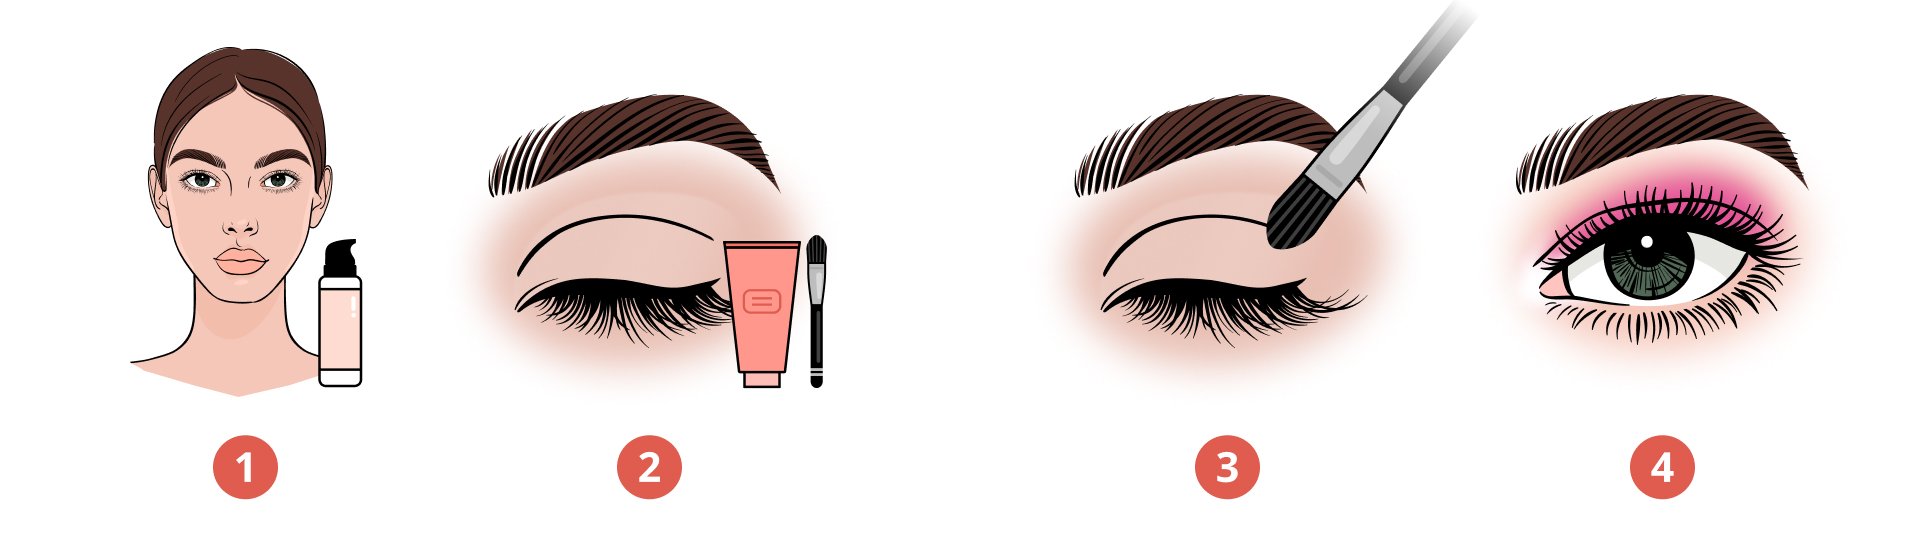 How To Apply Eyeshadow Like A Pro From